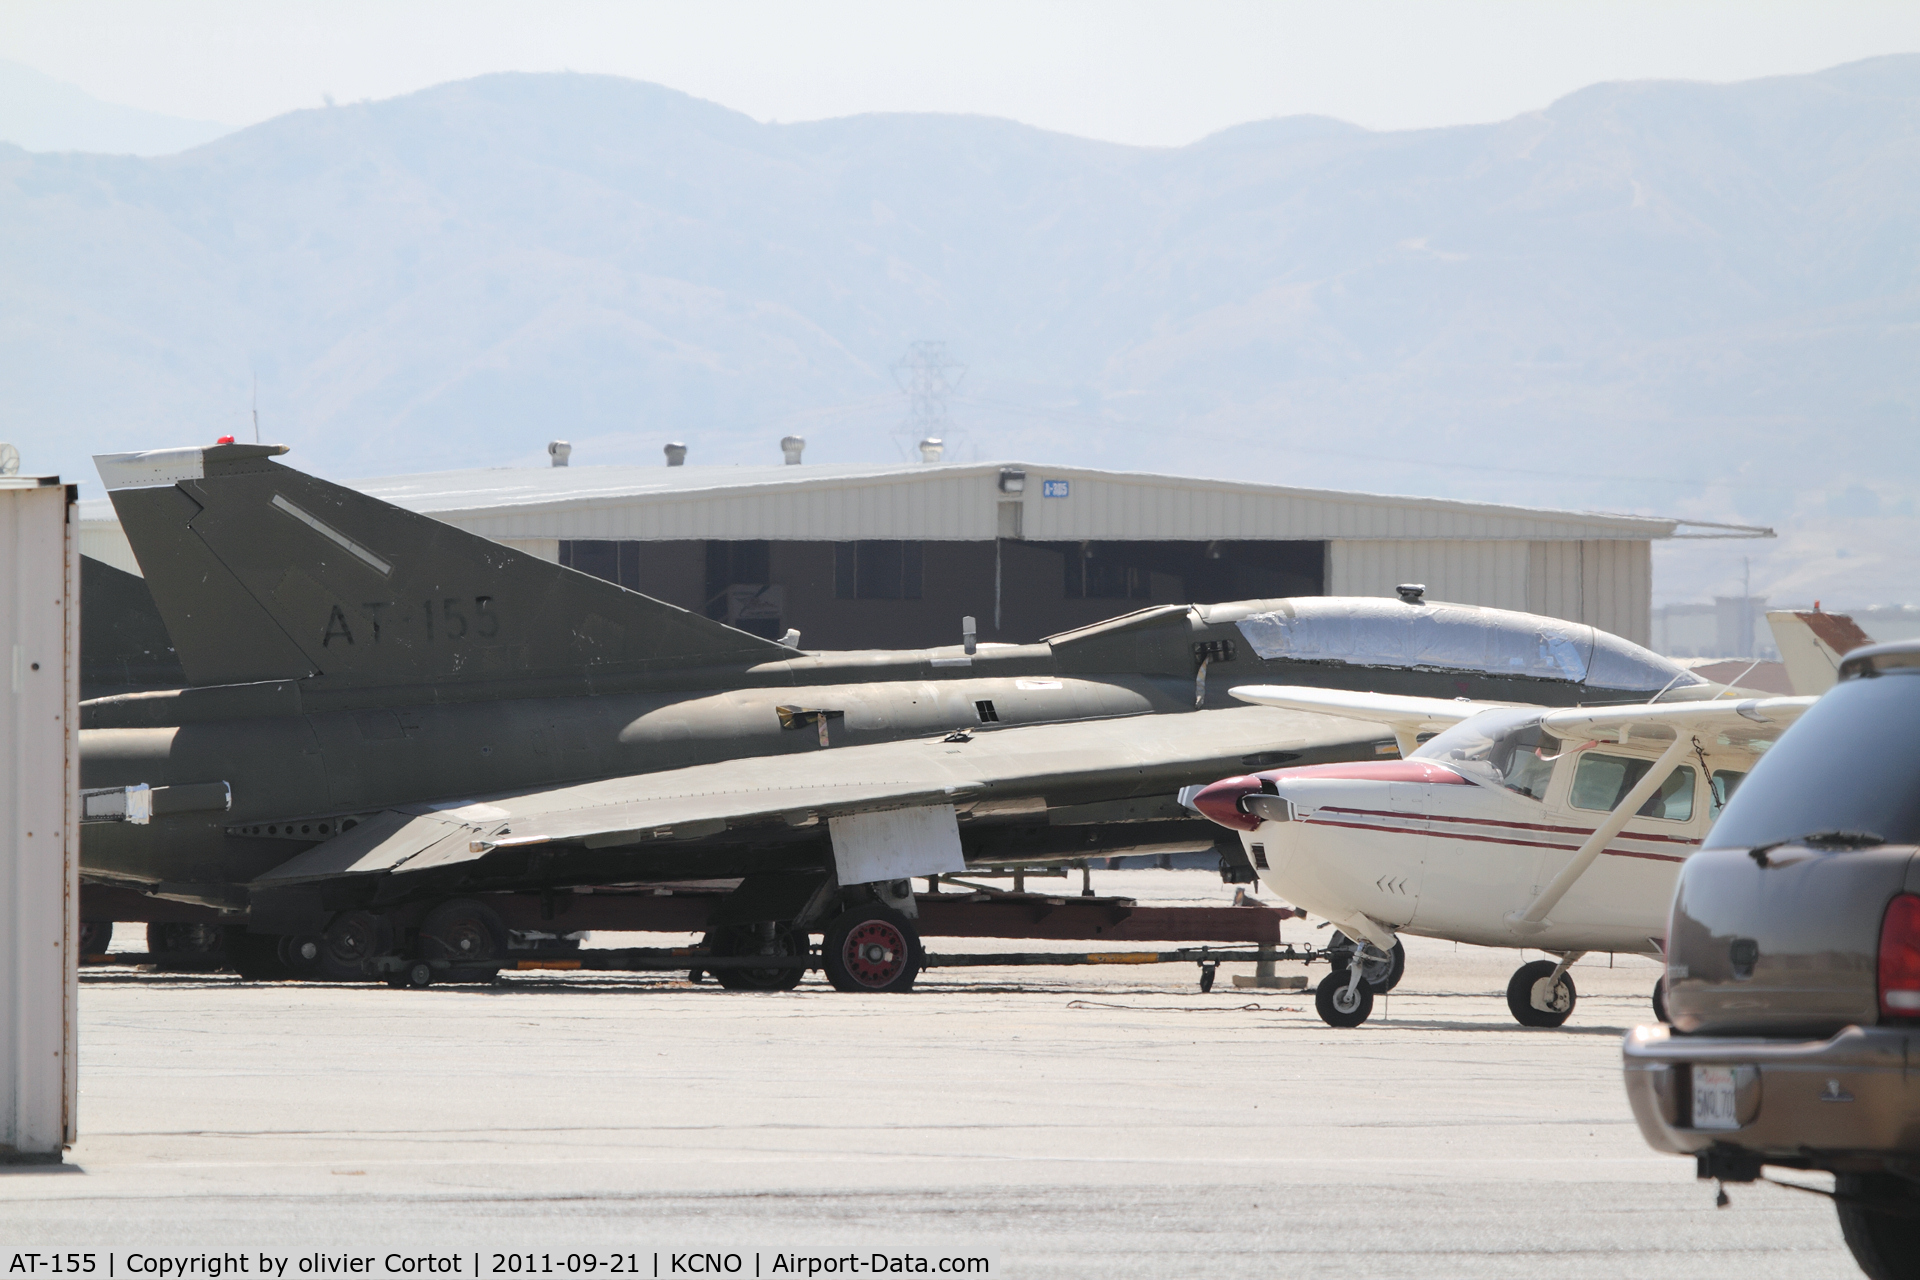 AT-155, 1972 Saab TF-35 Draken C/N 35-1155, Now at the Chino Airport, seems to be in flyable condition.